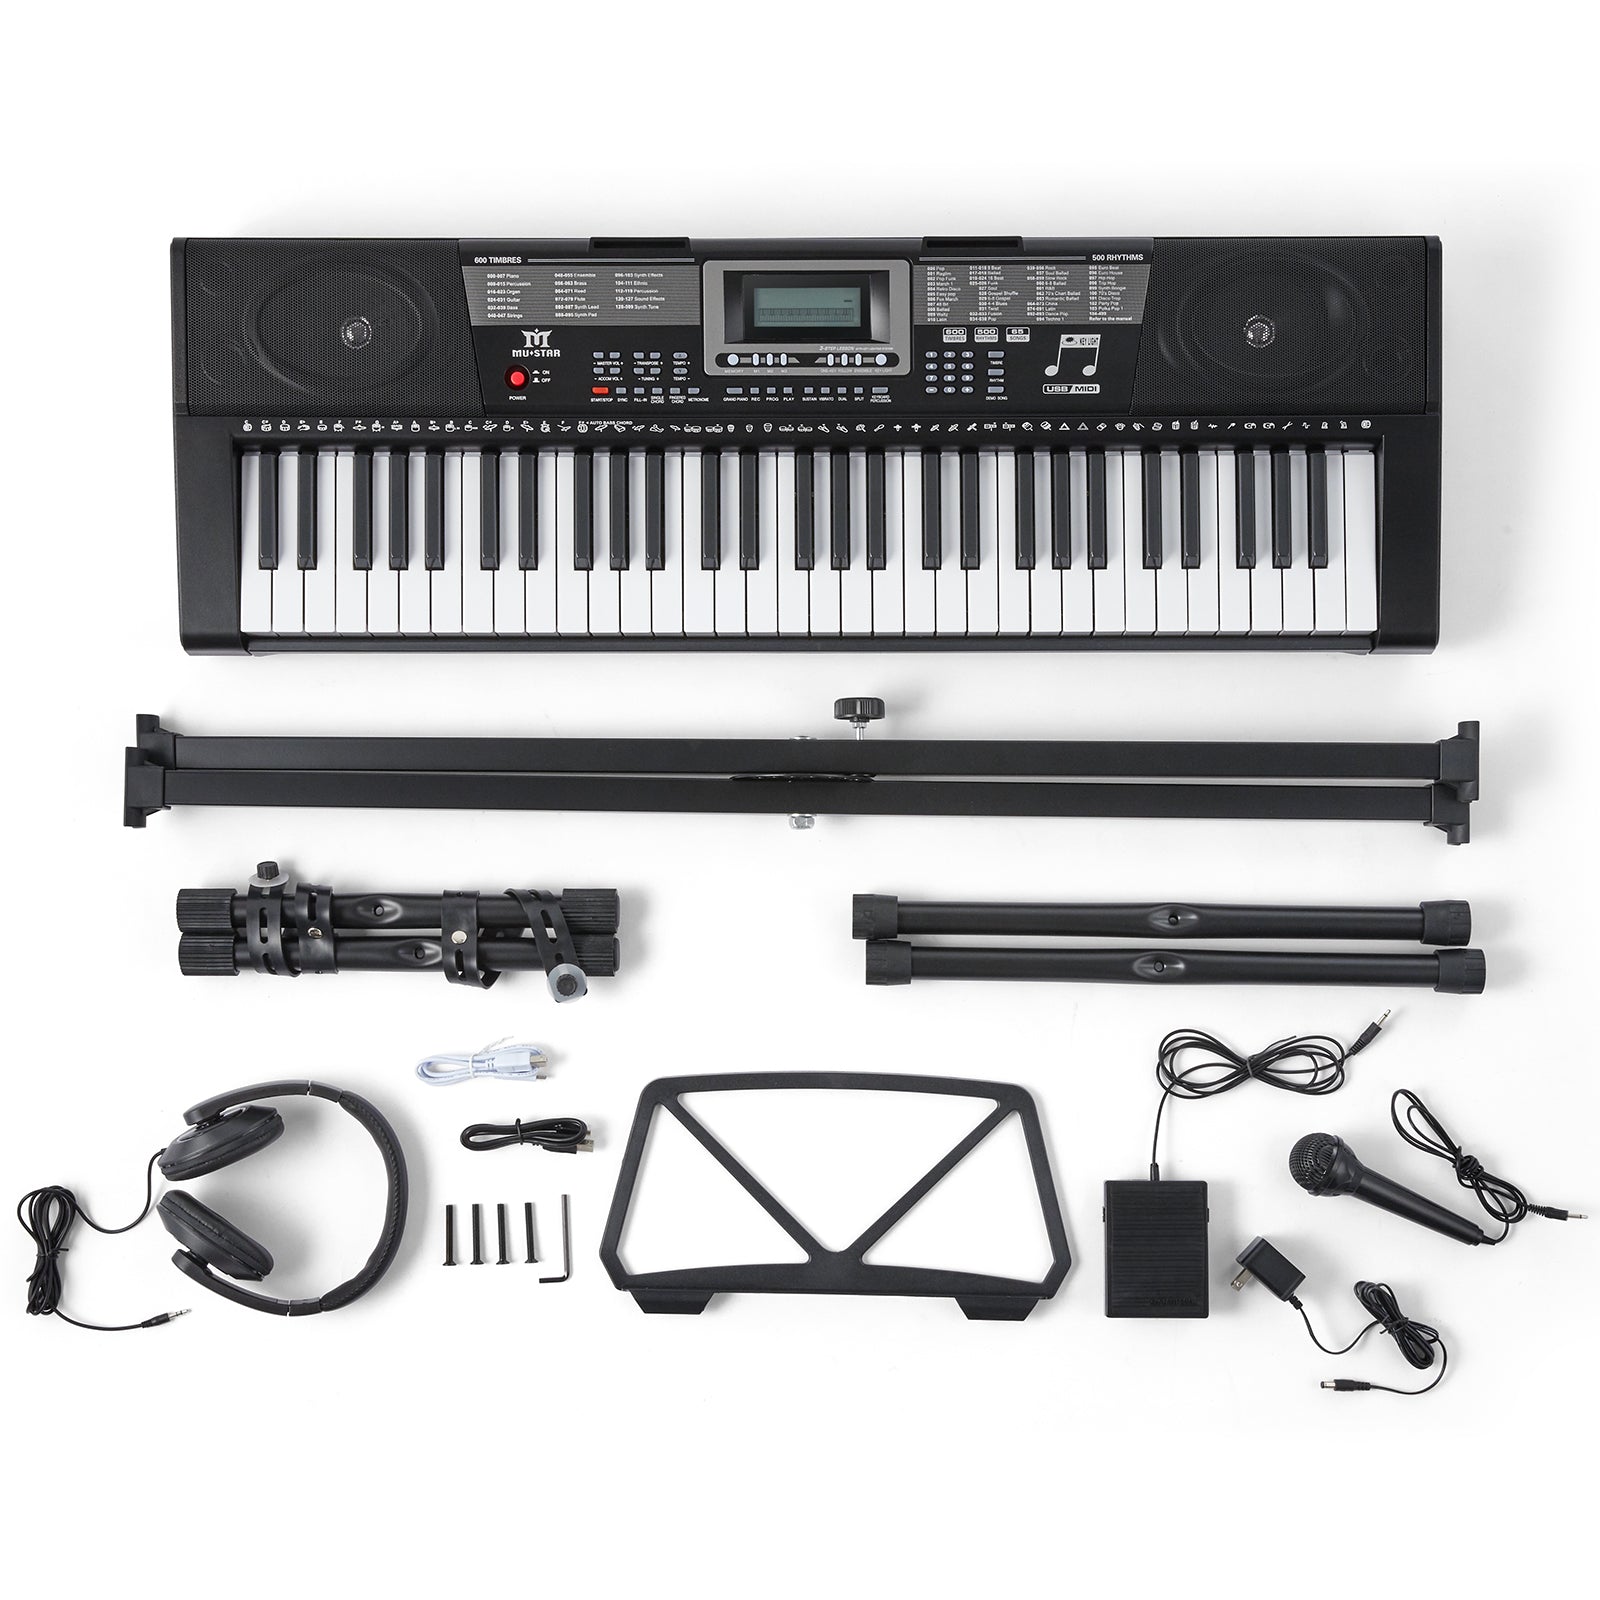  MUSTAR Piano Keyboard, MEKS-500 61 Key Learning Keyboard Piano  with Lighted Up Keys, Electric Piano Keyboard for Beginners, Stand, Sustain  Pedal, Headphones/Microphone, USB Midi, Built-in Speakers : Musical  Instruments